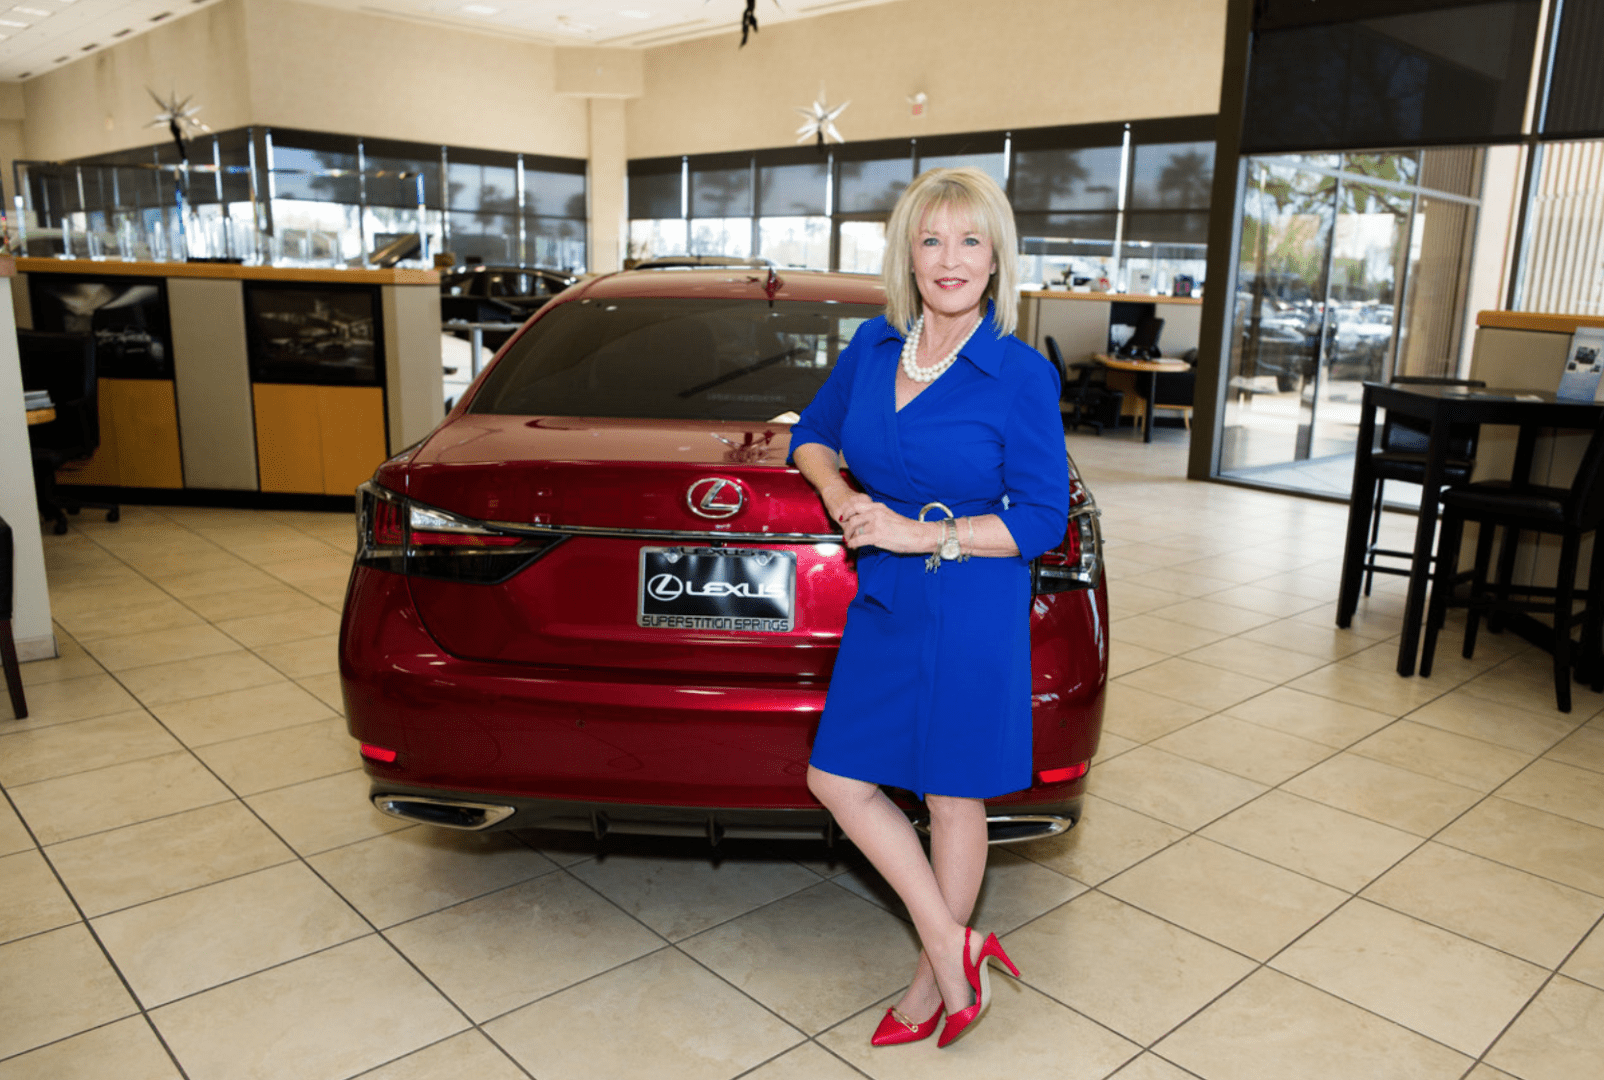 A woman in a blue dress and red heels stands confidently in front of a red lexus in a car dealership showroom.